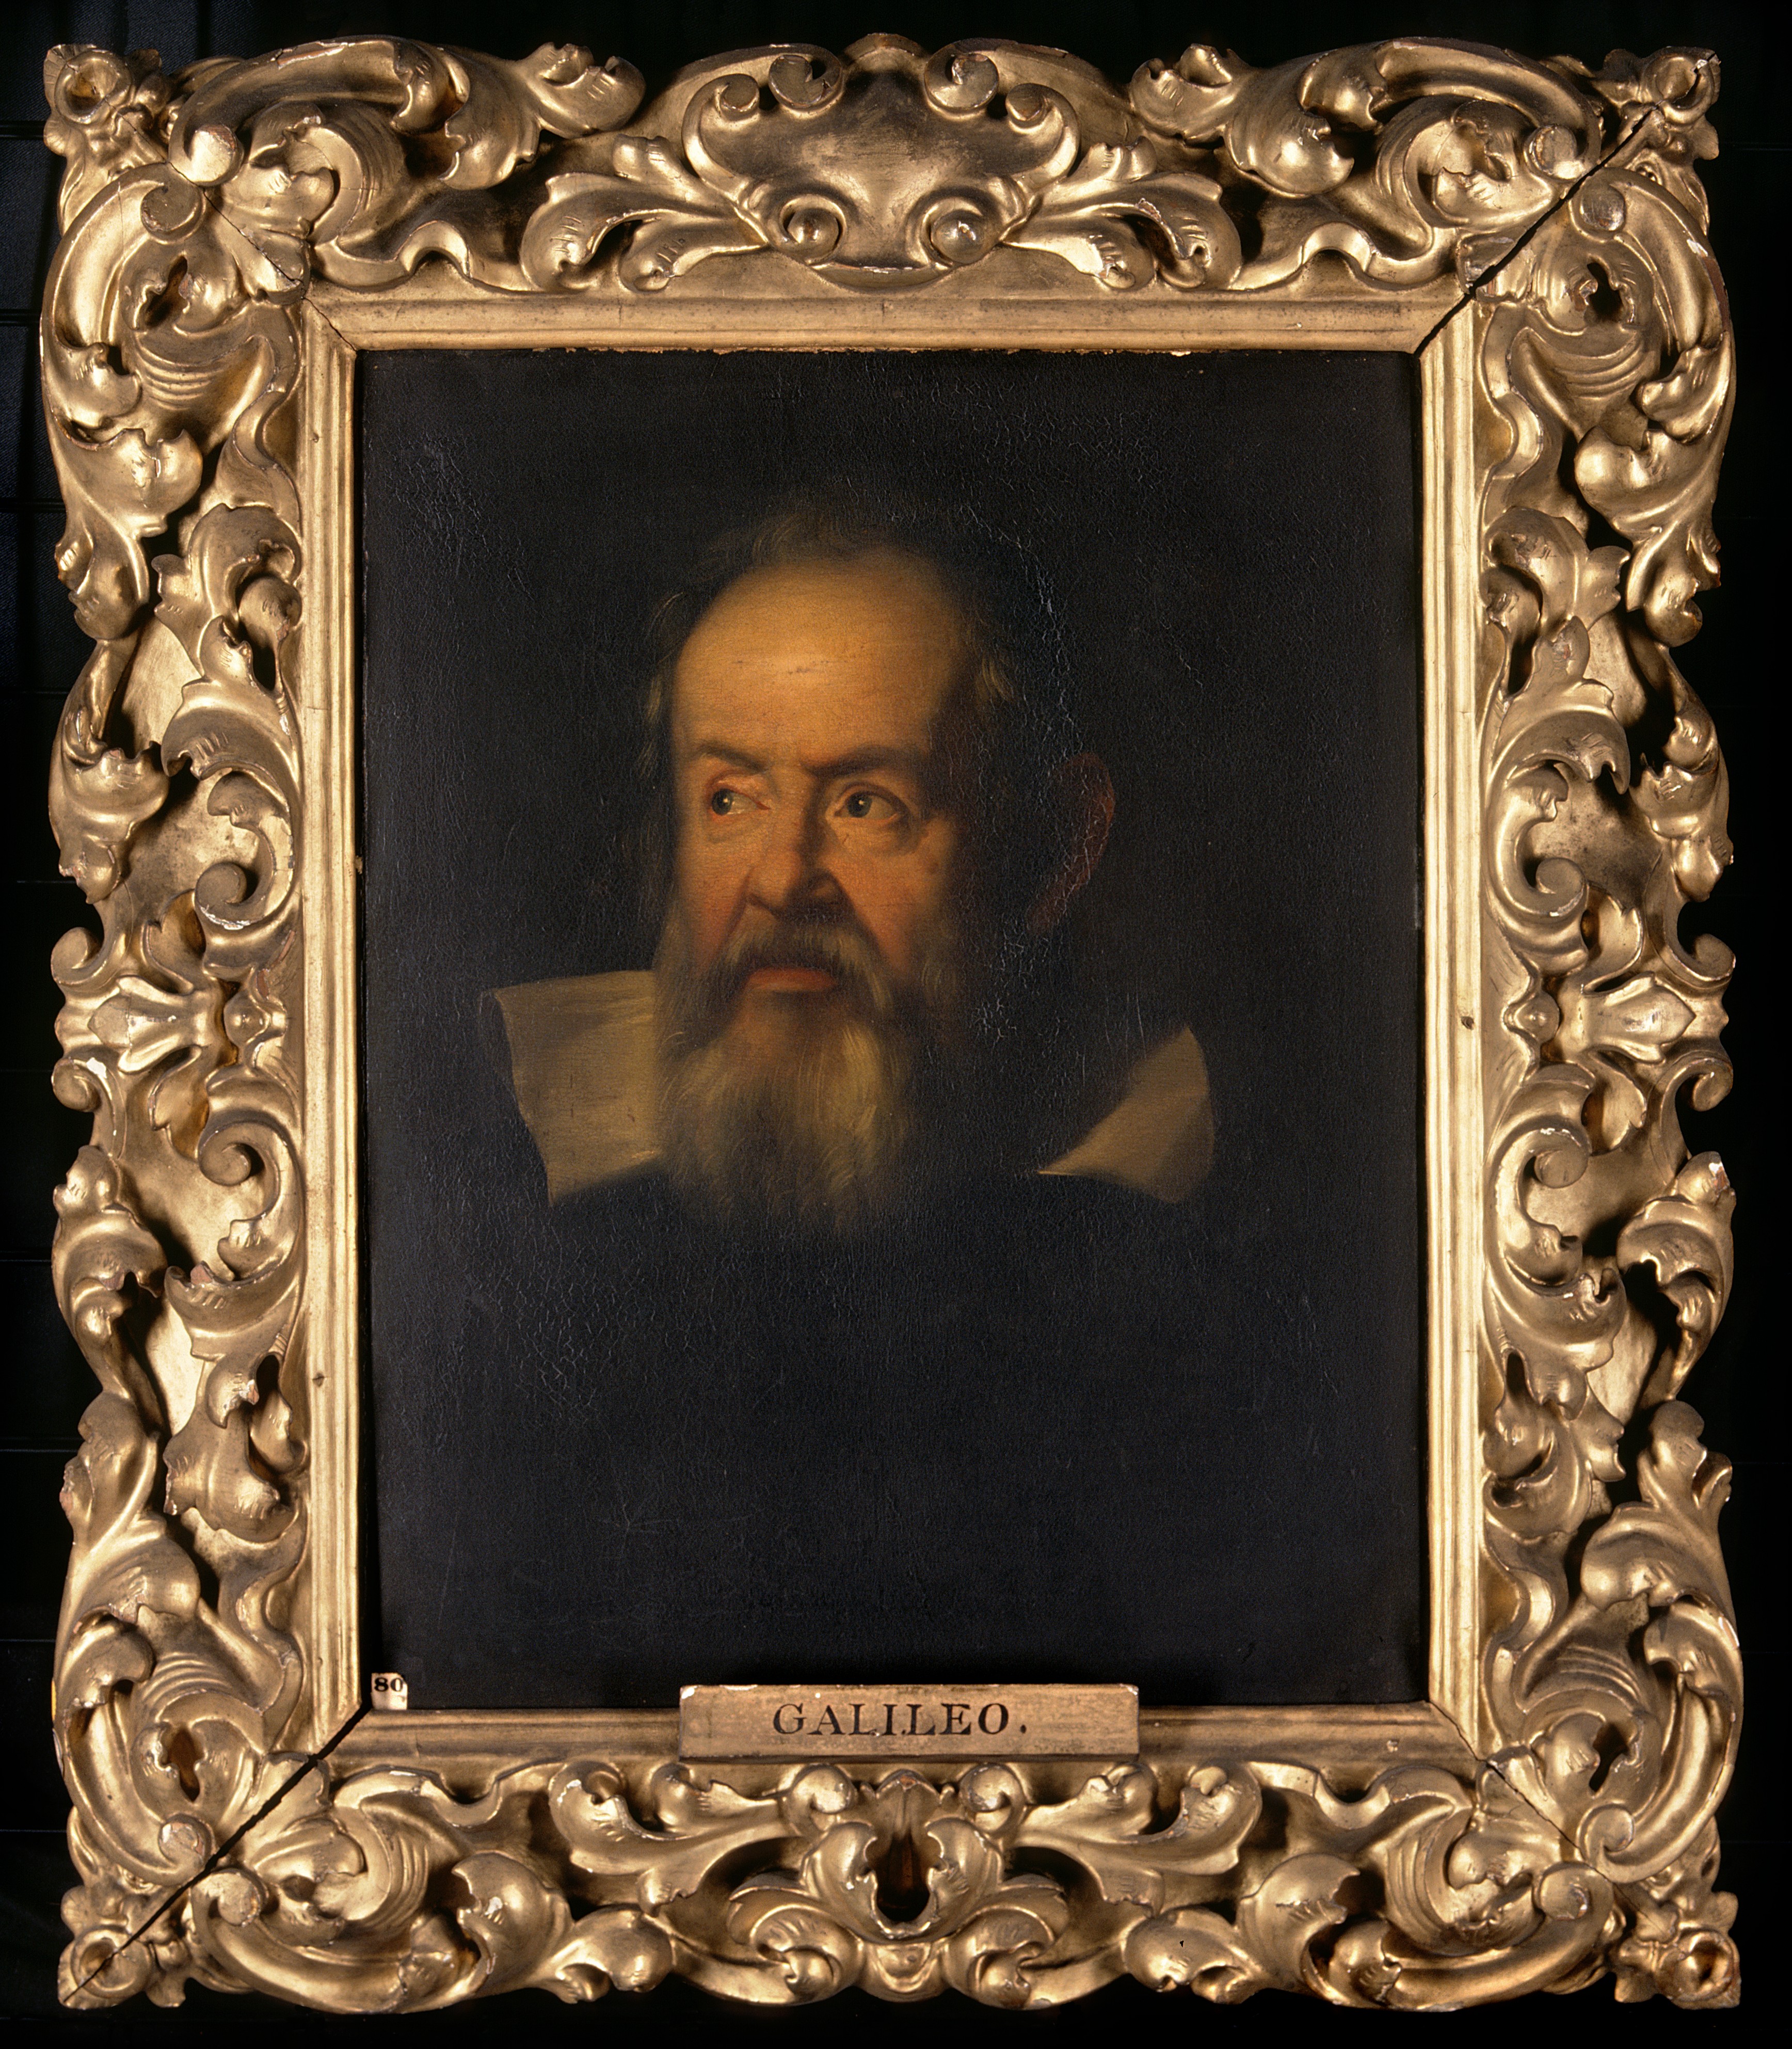 Galileo Galilei (1564-1642). Oil painting after Justus Suste Wellcome V0017867